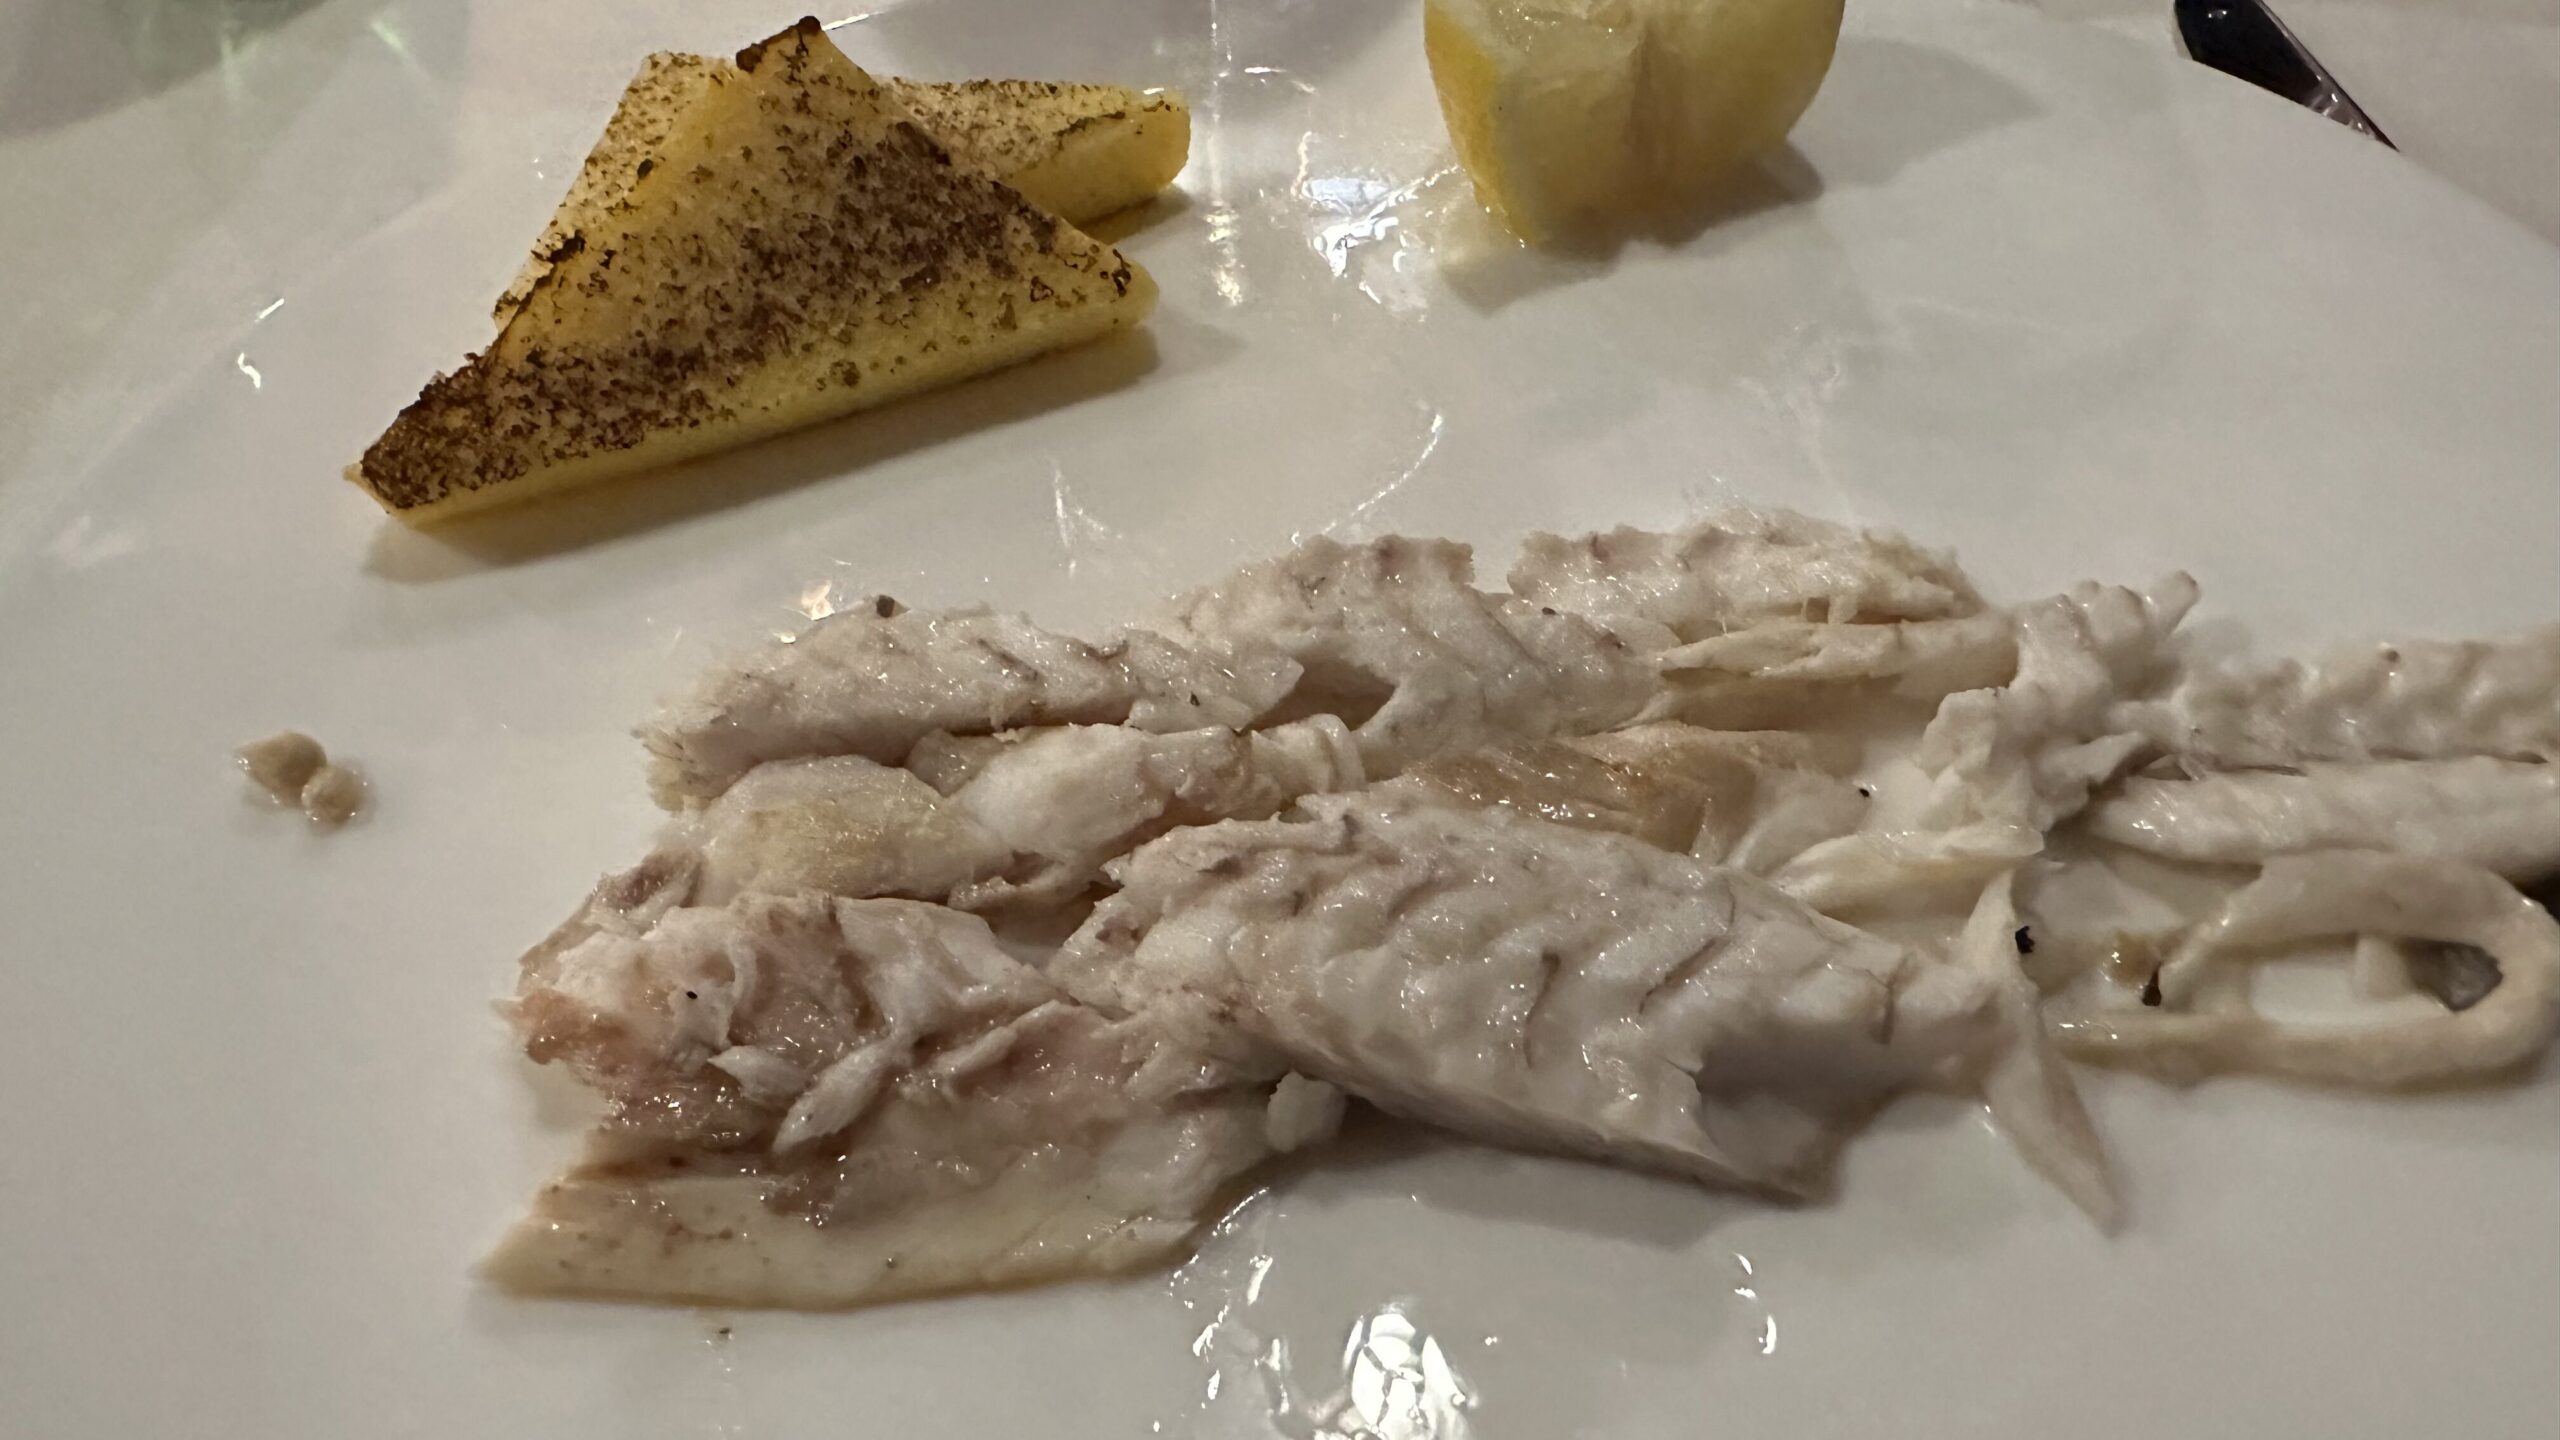 Antica Trattoria Poste Vecie serves the freshest fish imaginable, straight from the market.